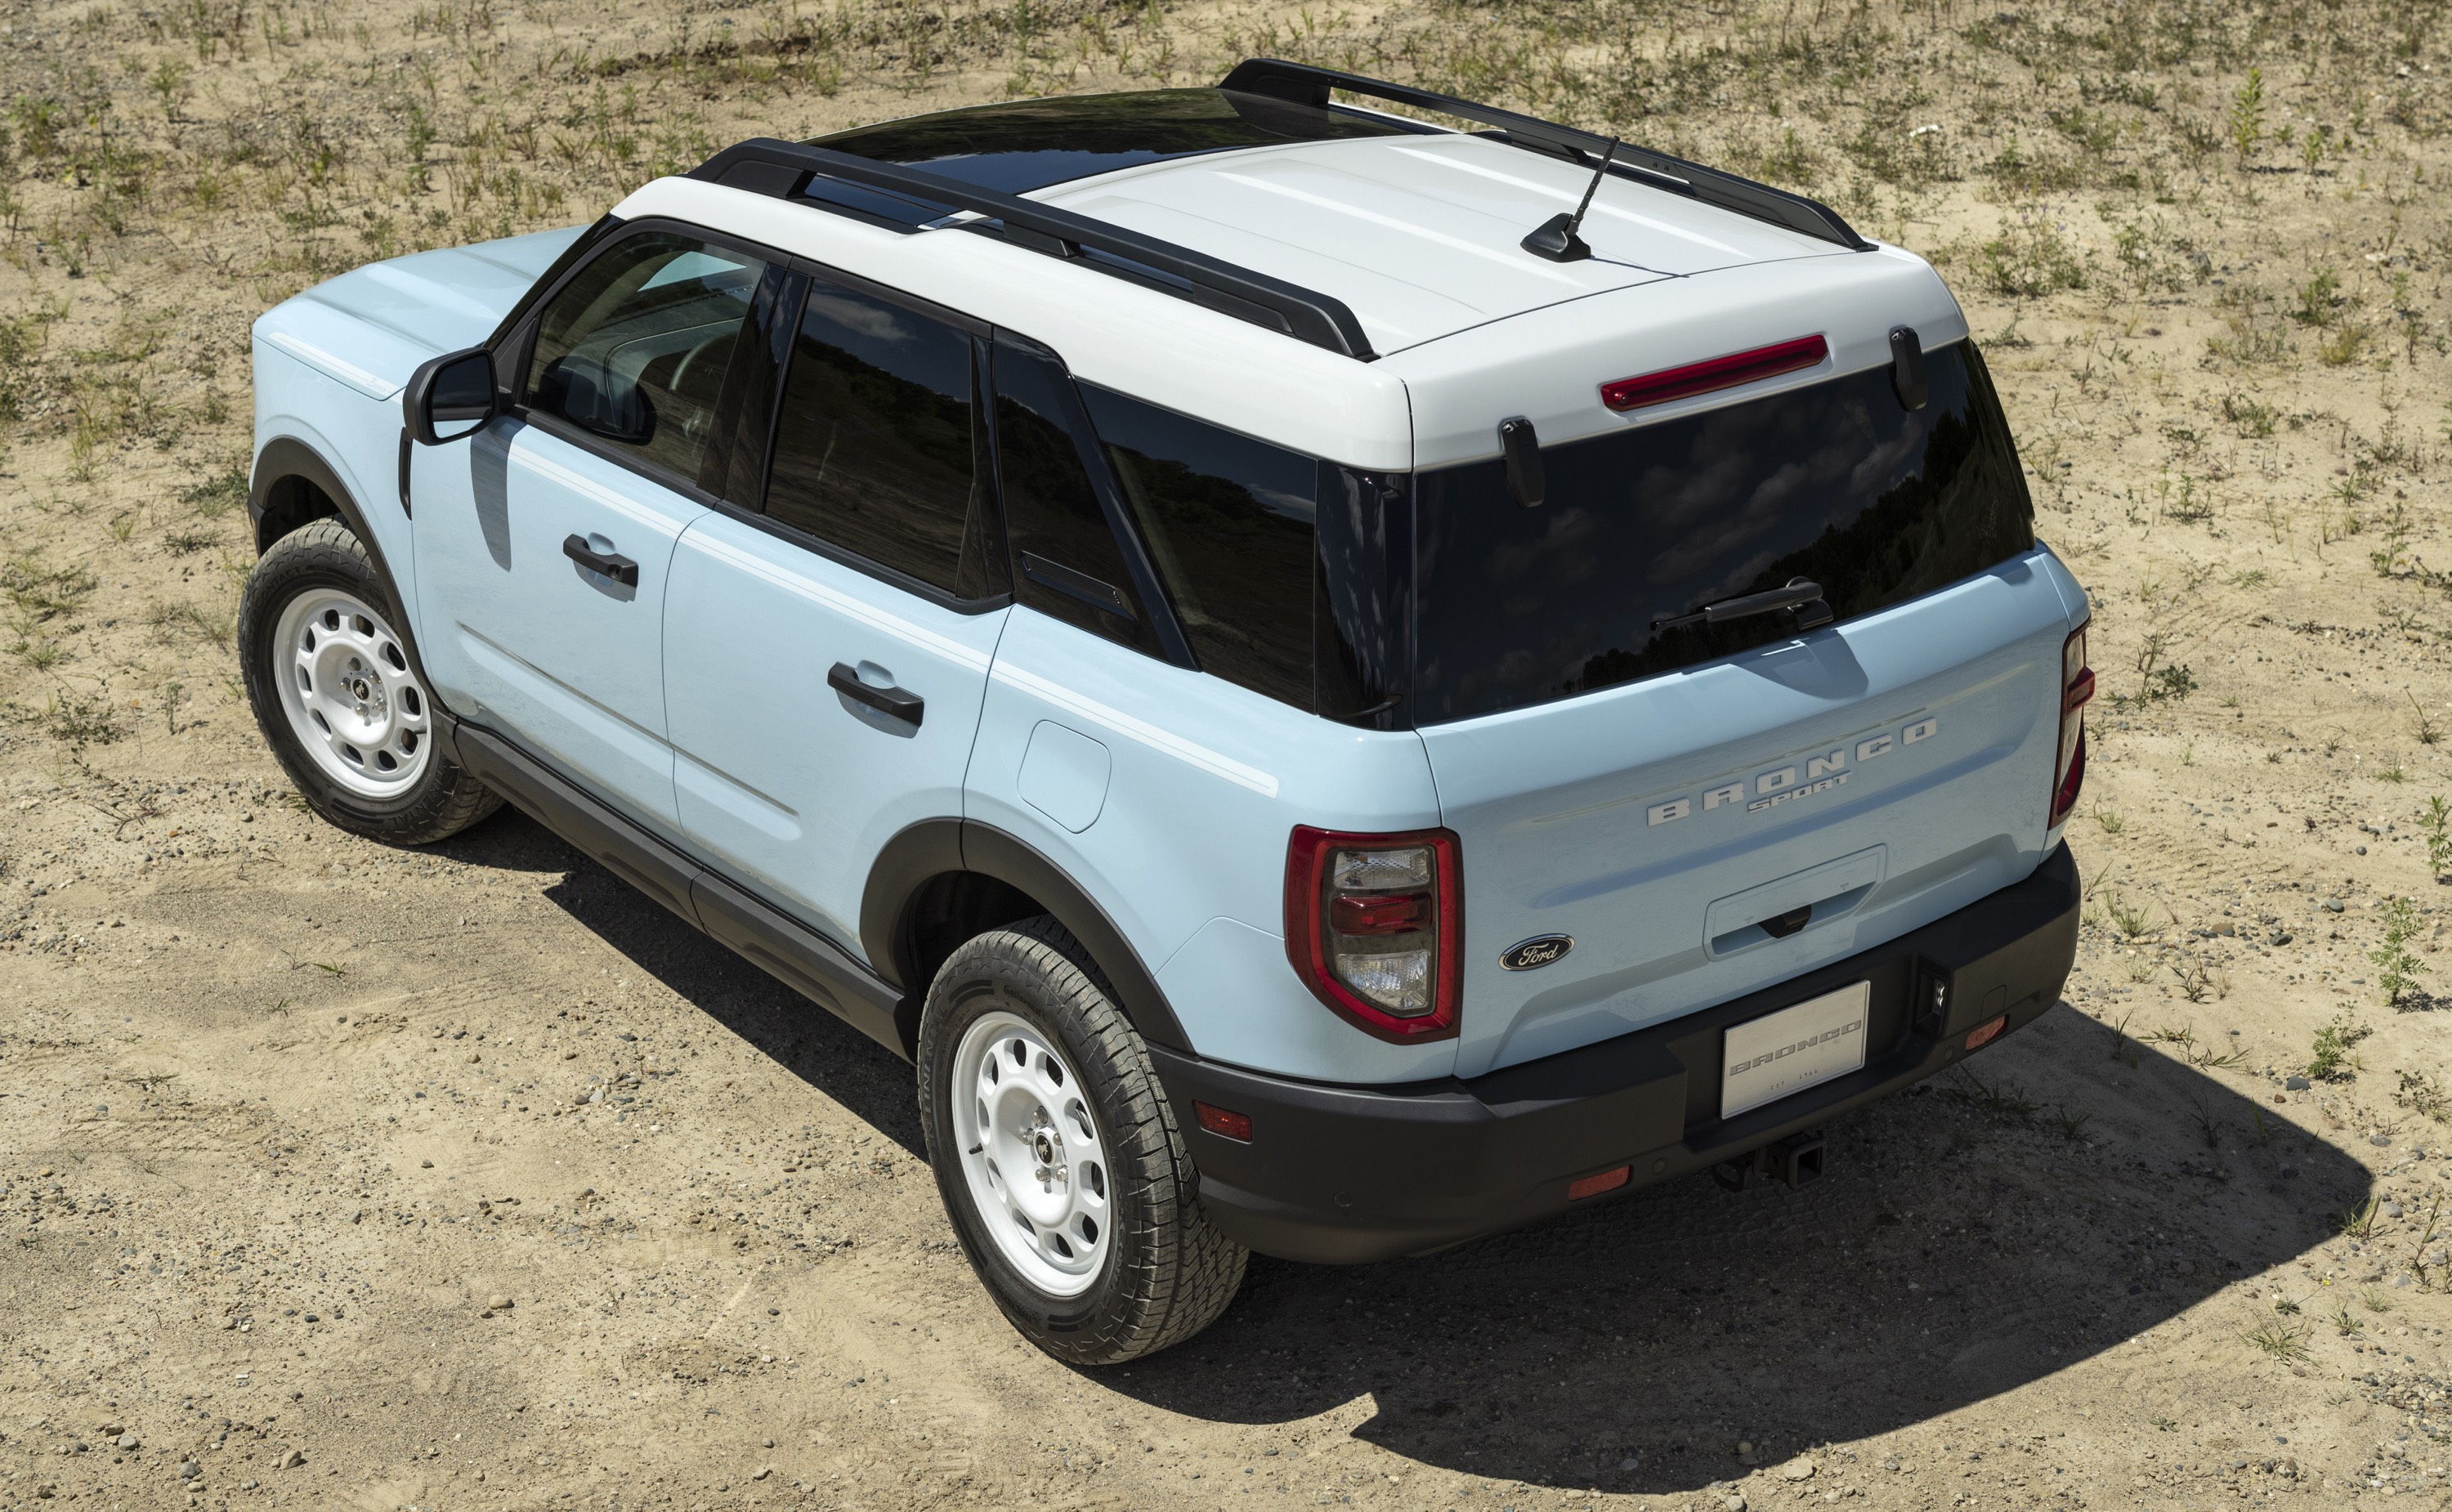 Ford Bronco Heritage Edition